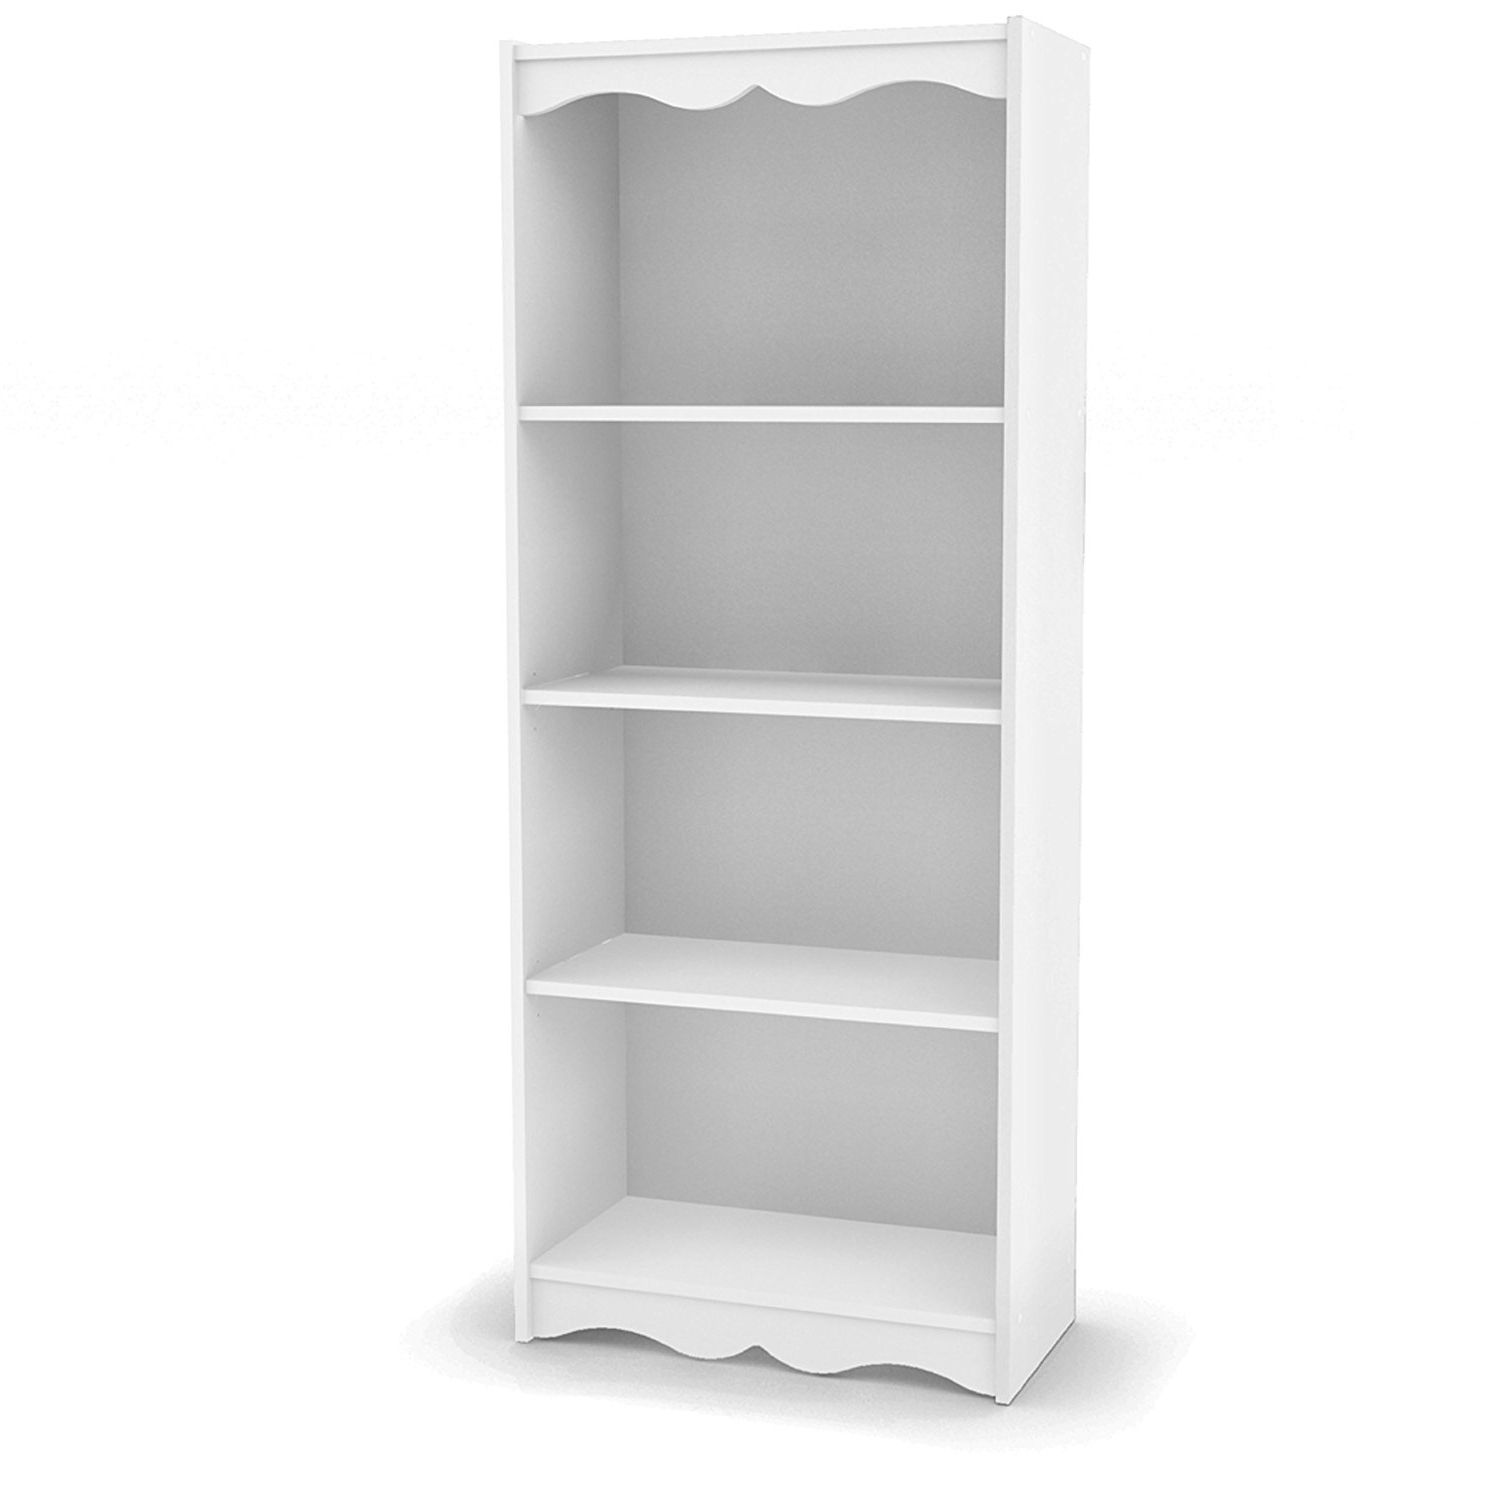 Amazon: Sonax Hawthorn 60 Inch Tall Bookcase, Frost White Intended For Well Known Tall White Bookcases (View 2 of 15)